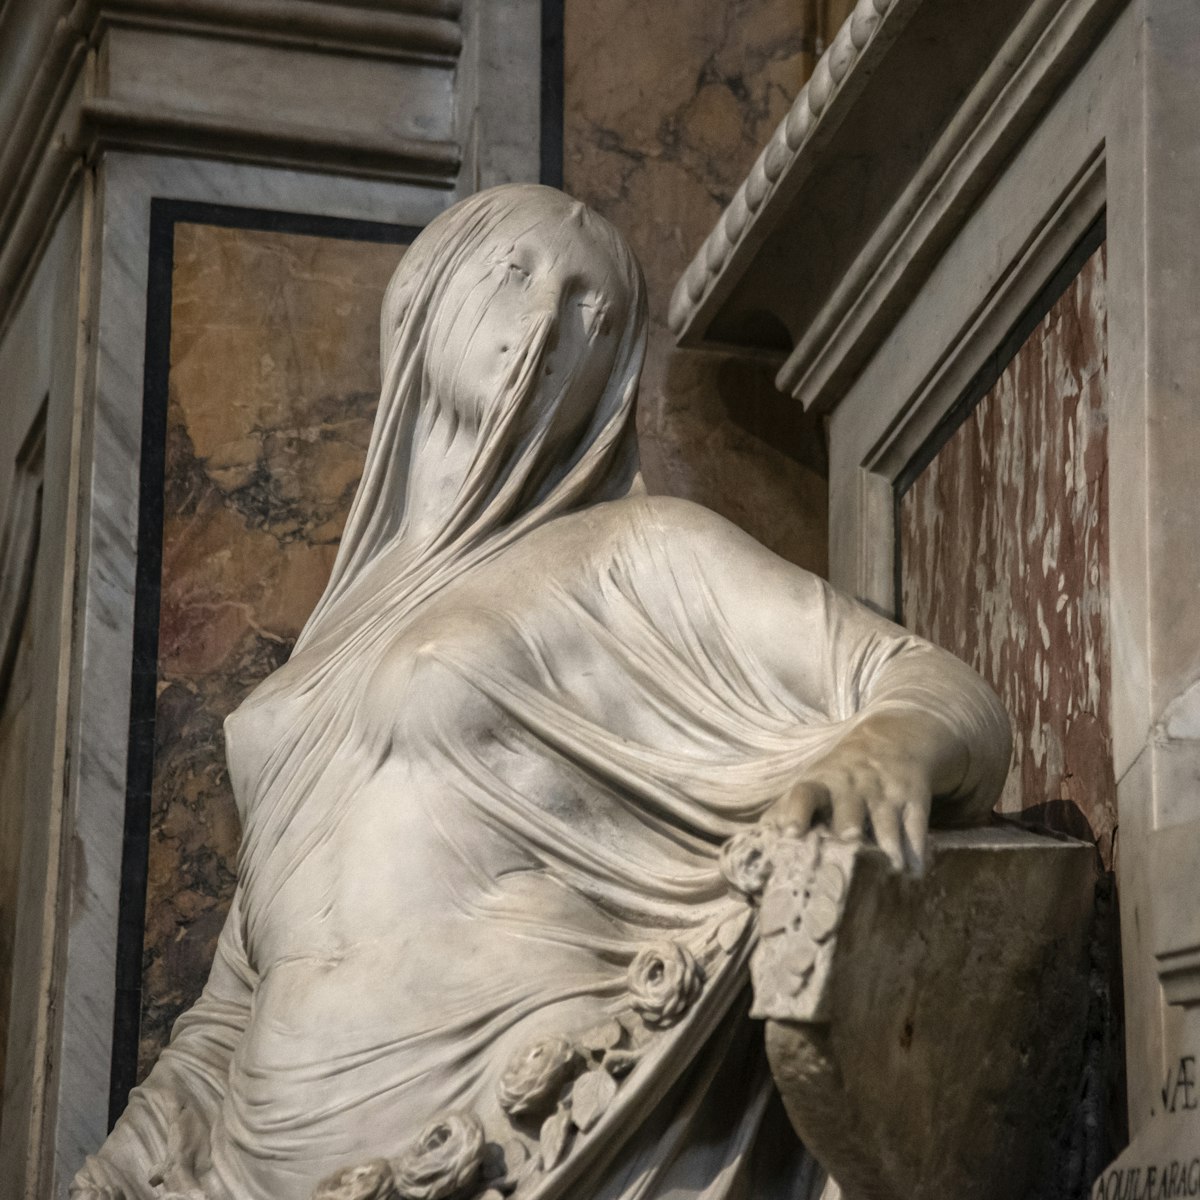 NAPLES, ITALY - JUNE 11: The Modesty of Antonio Corradini in the Sansevero Chapel during the reopening to the public on June 11, 2020 in Naples, Italy. The Sansevero Chapel Museum can be visited again after the closure imposed by the lockdown for the covid-19 emergency, exactly thirty years after the reopening to the public after the restoration works which in 1990 returned to the fruition the baroque masterpieces of the chapel commissioned by Raimondo di Sangro and the Veiled Christ by Giuseppe Sanmartino sculpted in 1753, today a symbol of the Neapolitan Baroque. (Photo by Ivan Romano/Getty Images)
1249041534